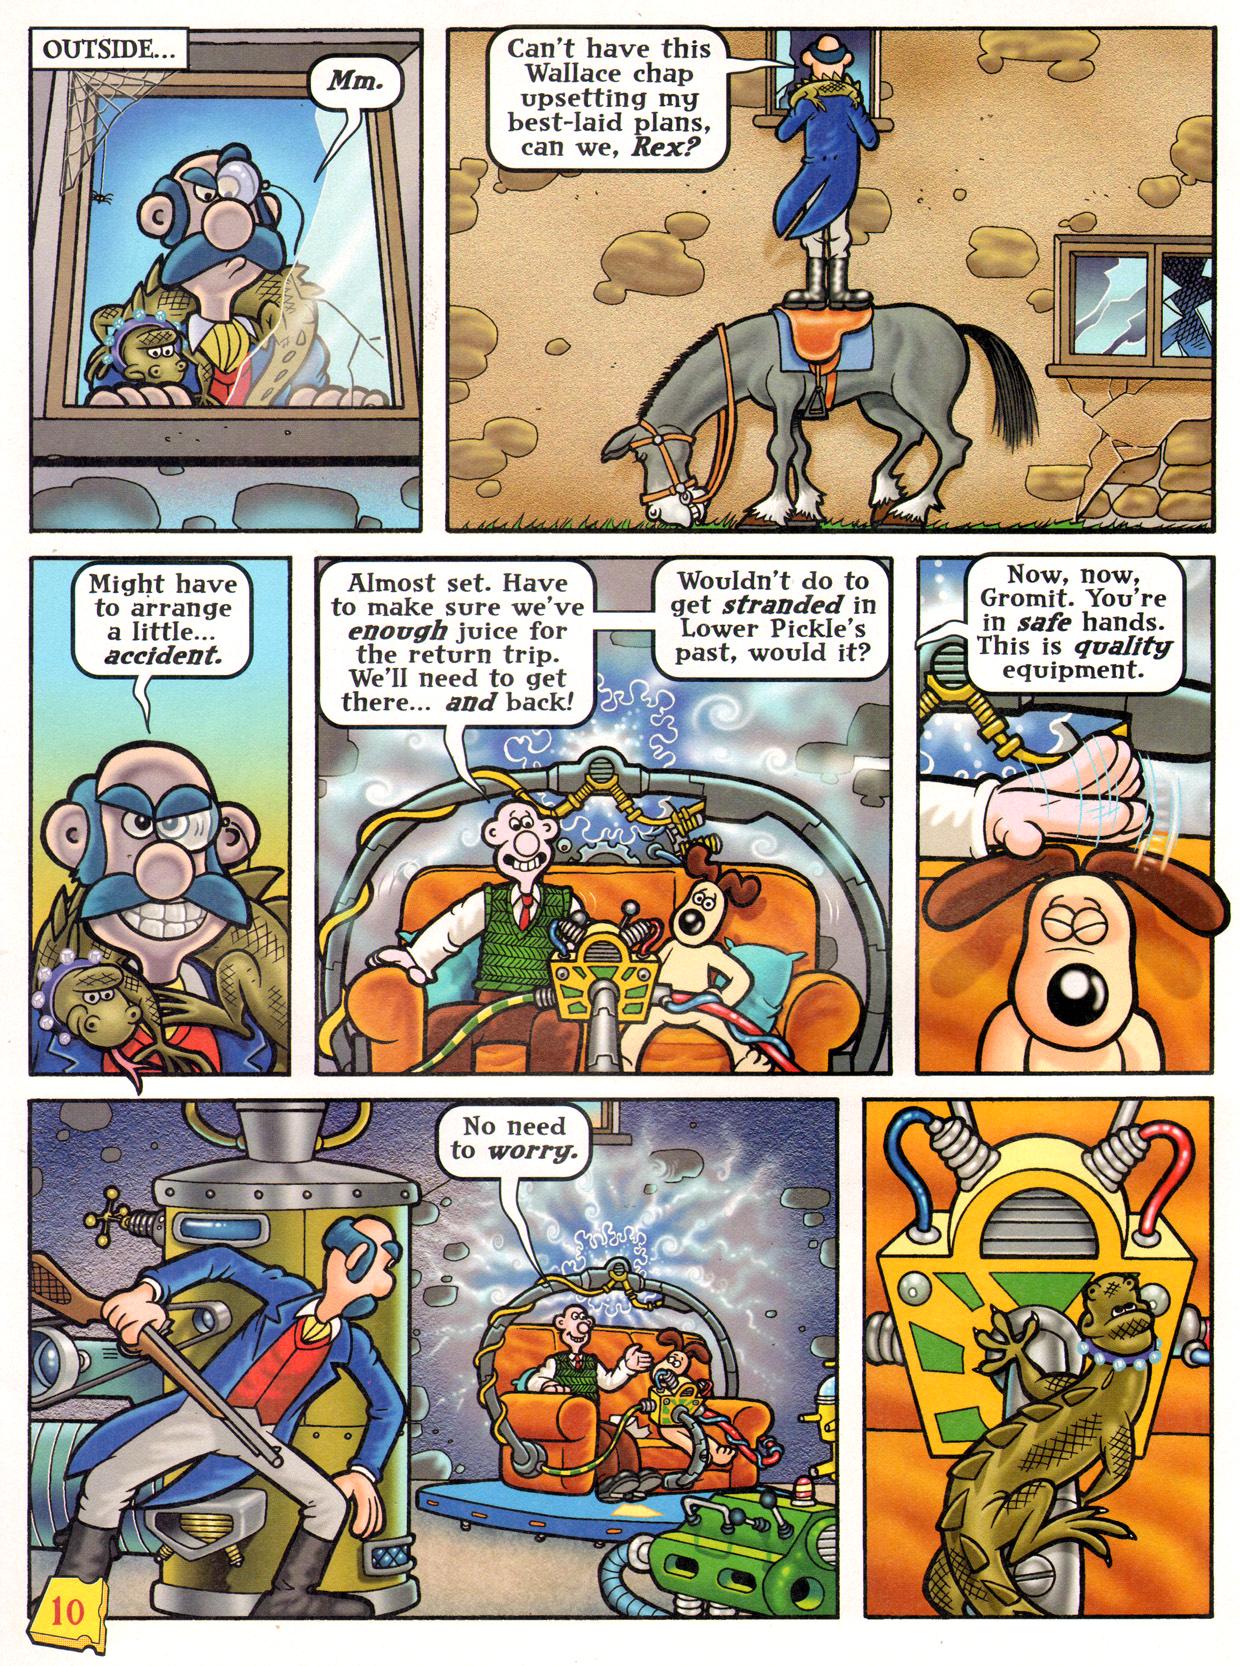 Read online Wallace & Gromit Comic comic -  Issue #11 - 10